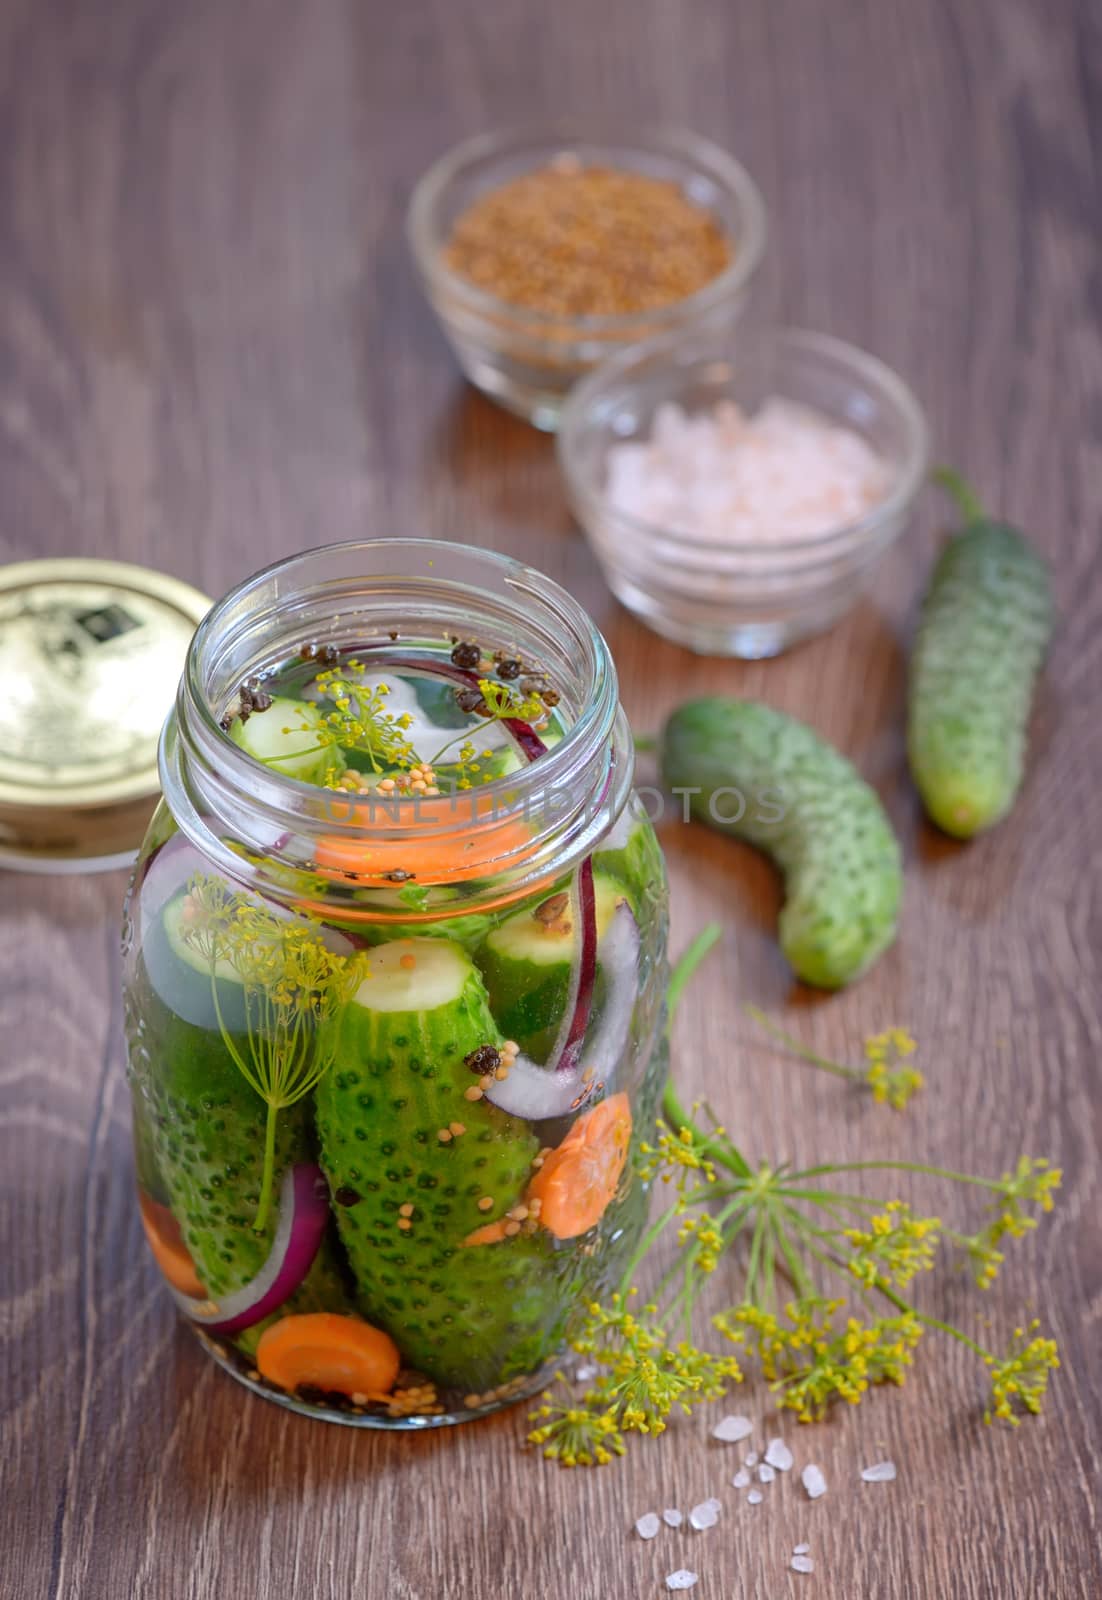 Pickled cucumbers, homemade preserved  by mady70